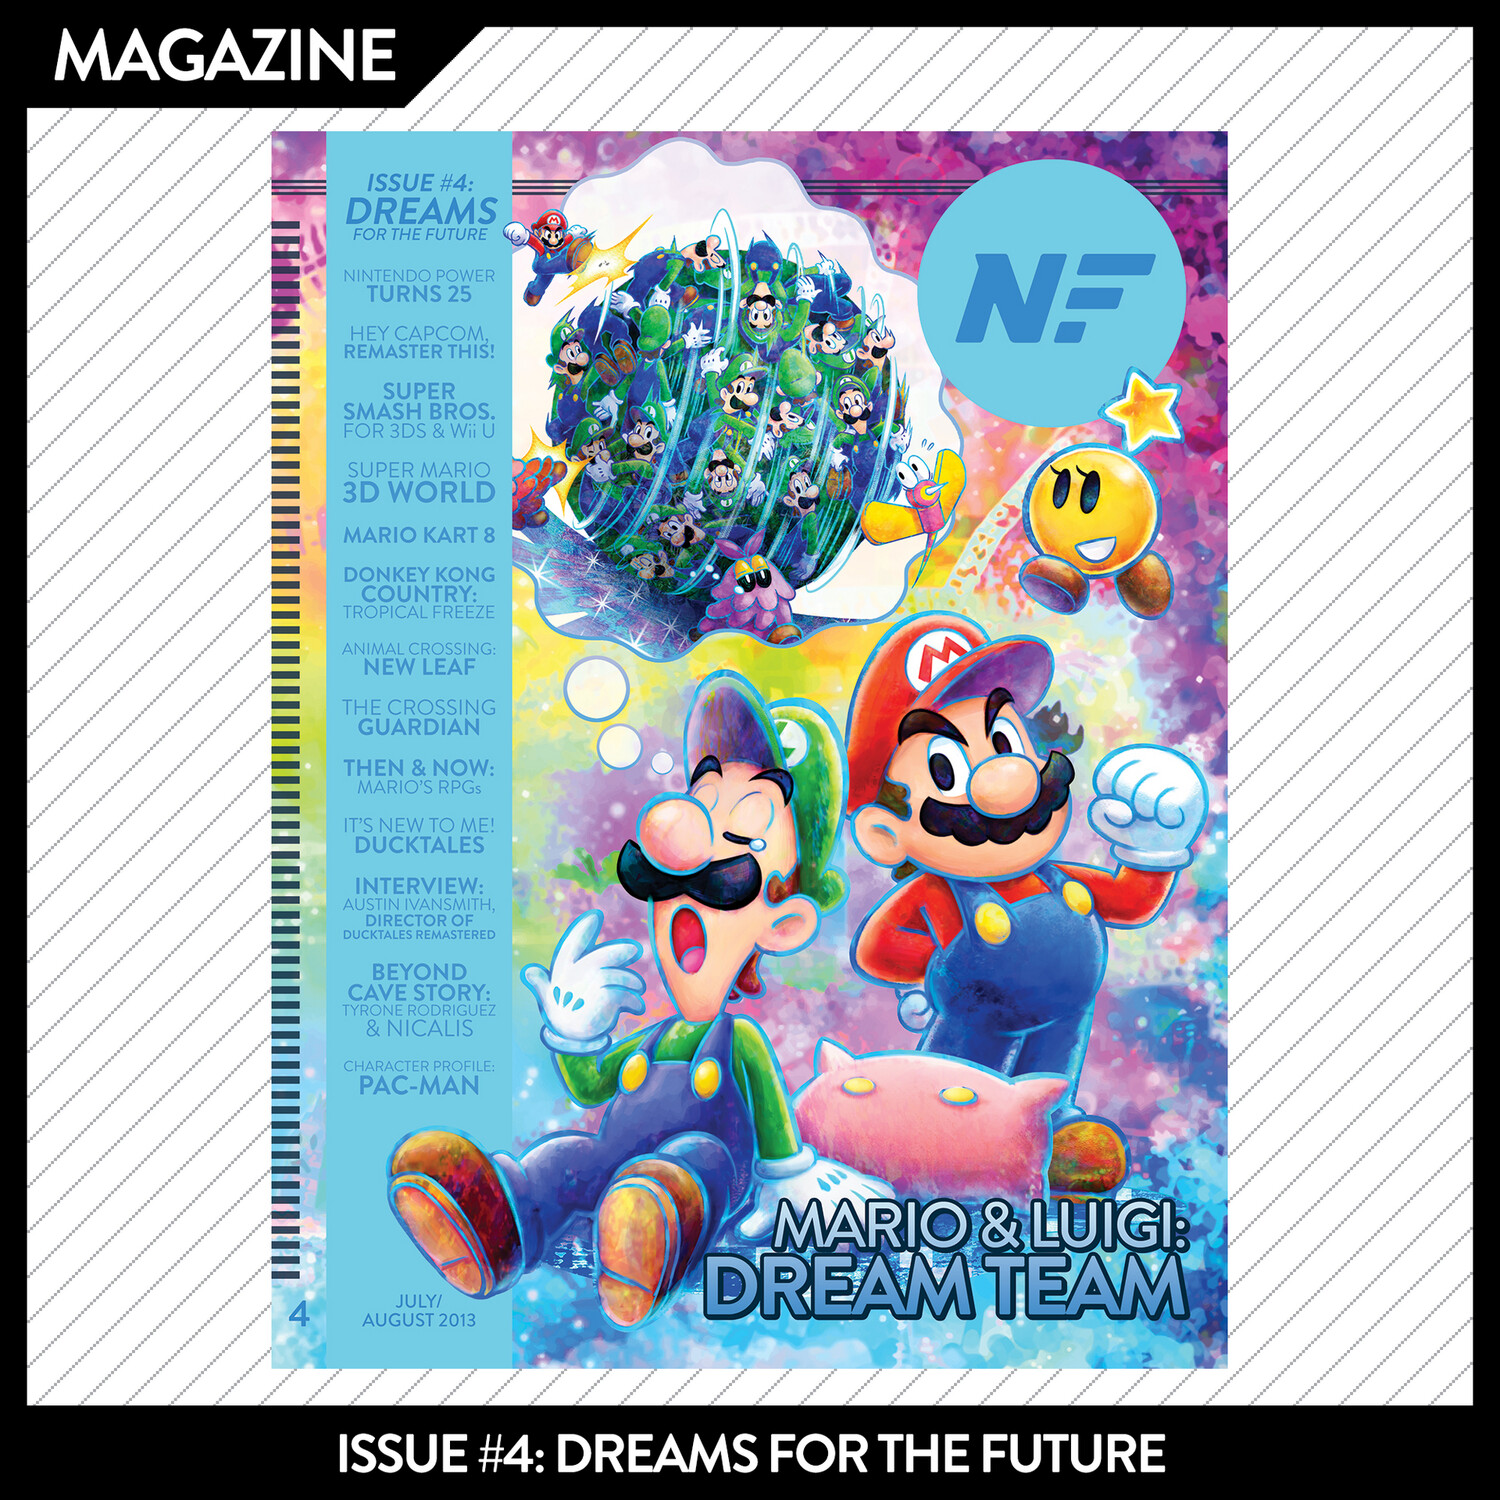 Issue #4: Dreams for the Future – July/August 2013